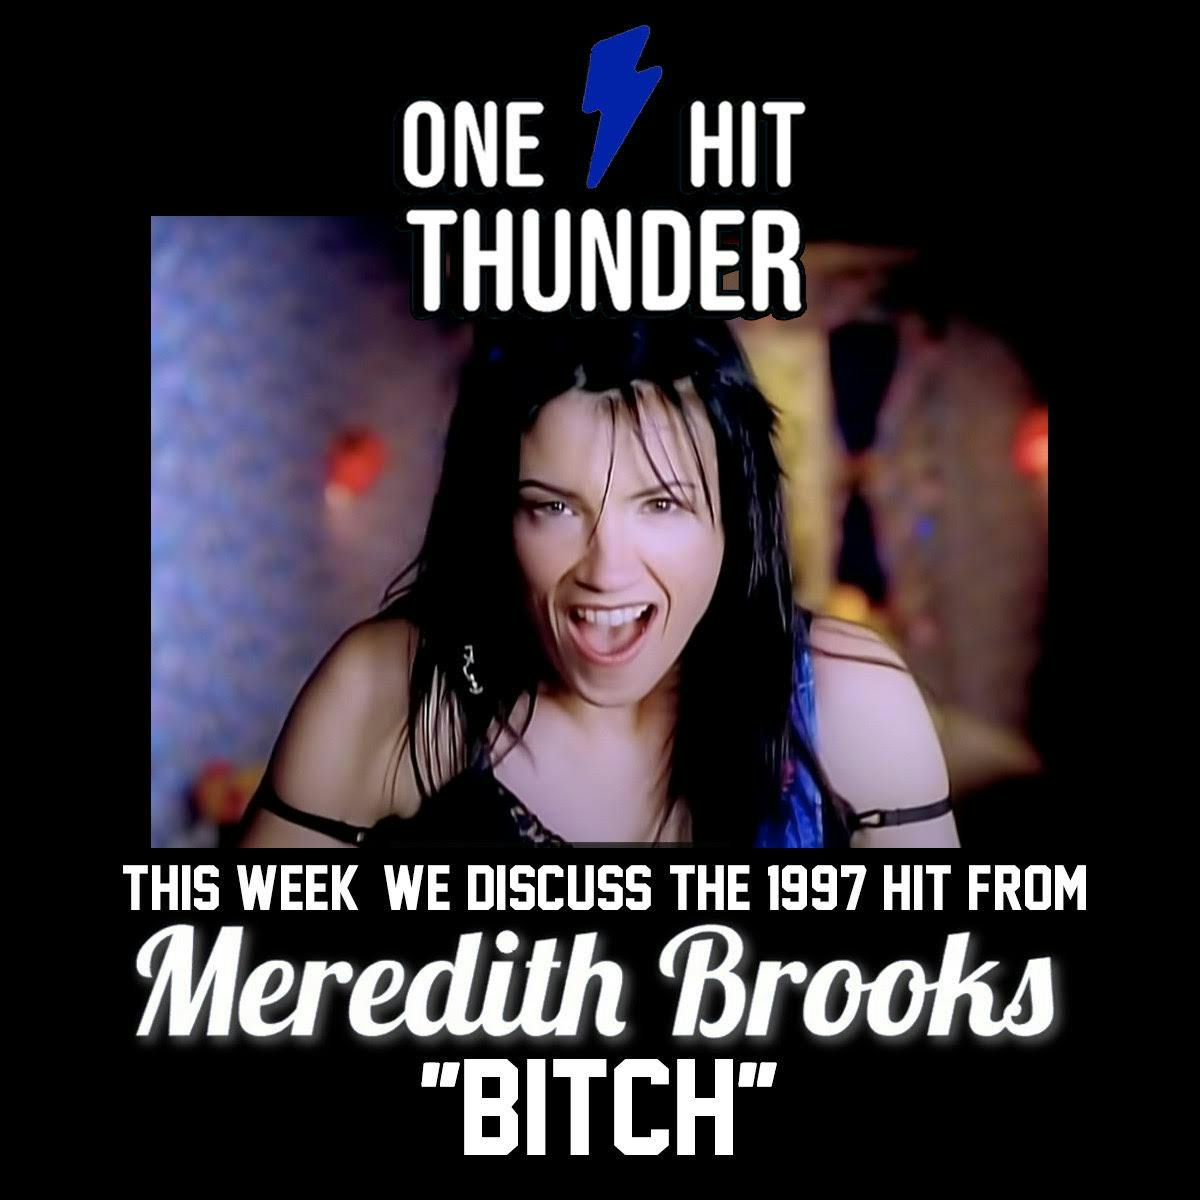 ”Bitch” by Meredith Brooks